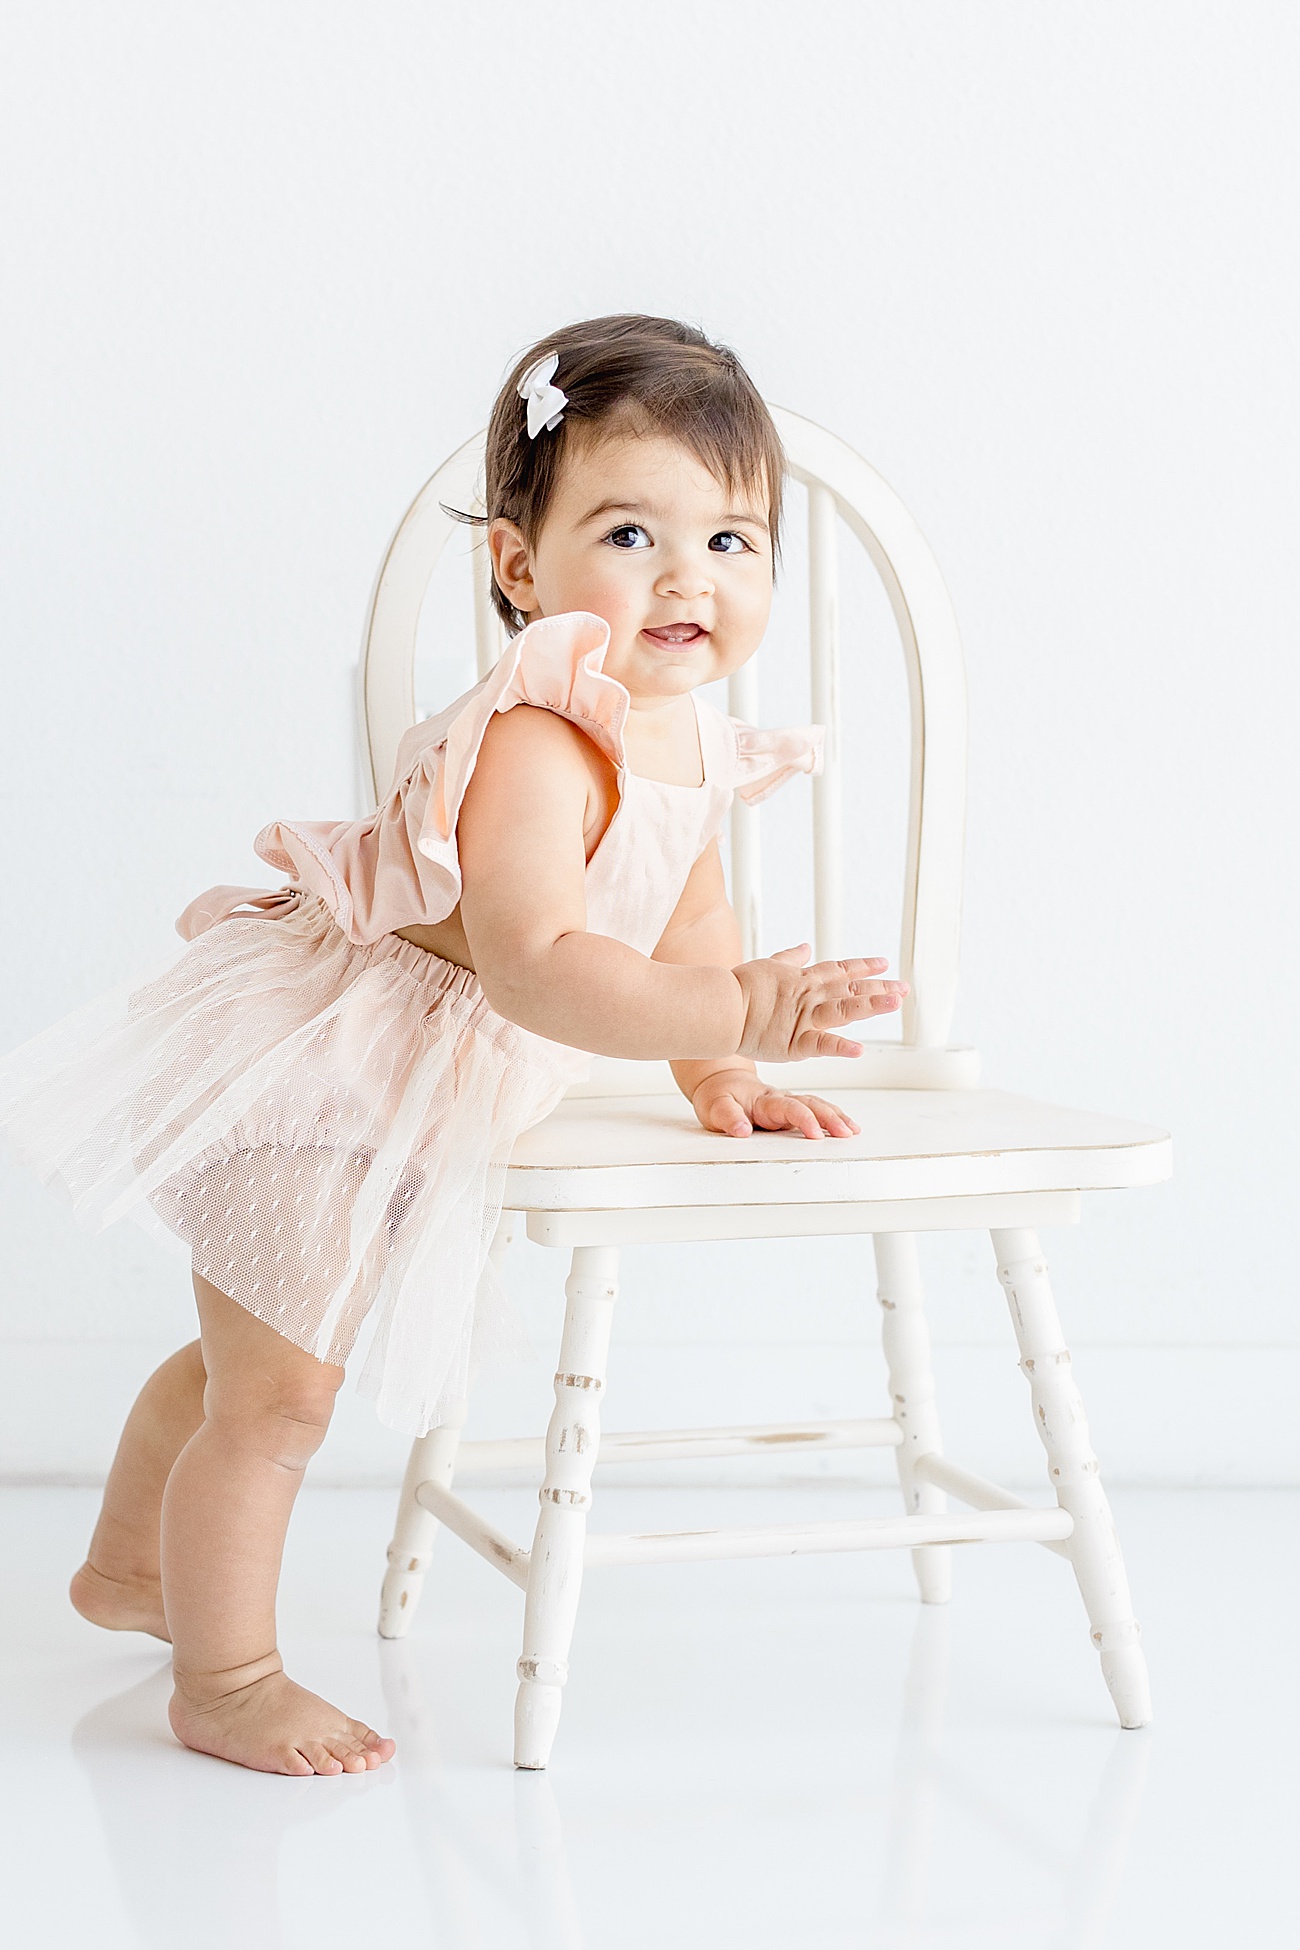 One Year Milestone Portraits with baby standing next to chair. Photo by Sana Ahmed Photography